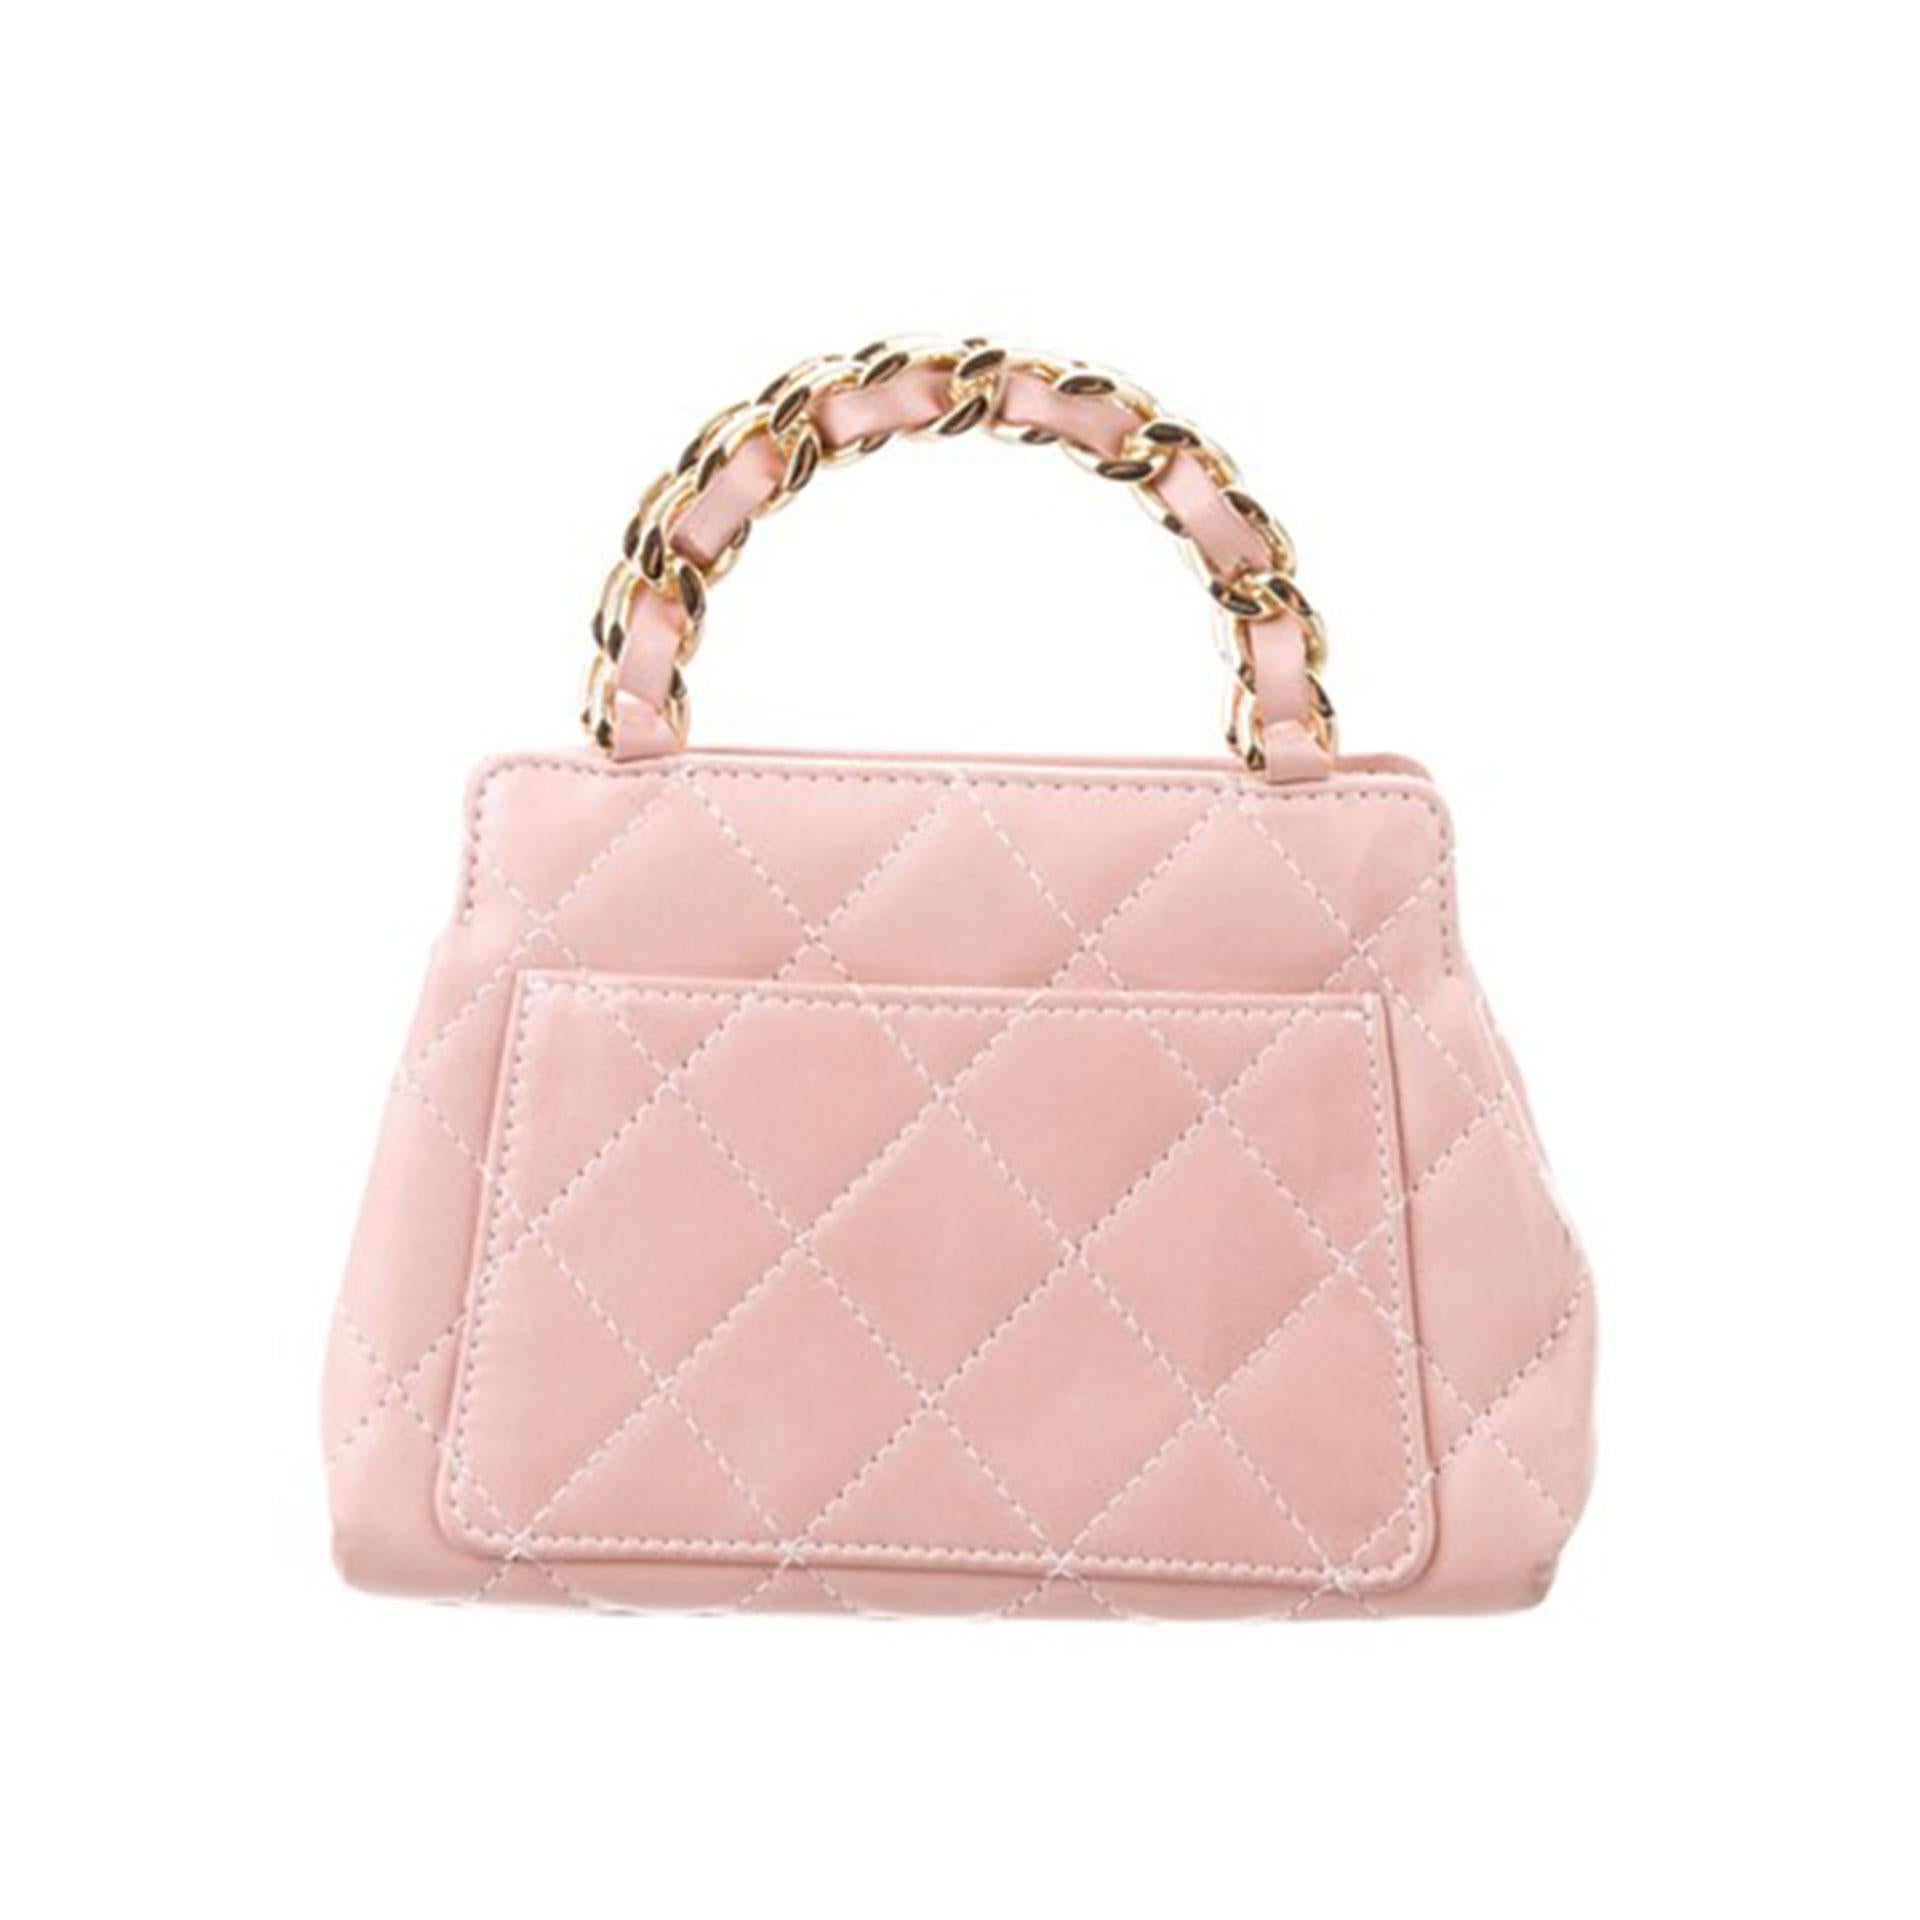 Ladies Clutch/Hand/Shoulder Bag-Baby Pink with Sequins><Free> P&P 2UK>>1st Class